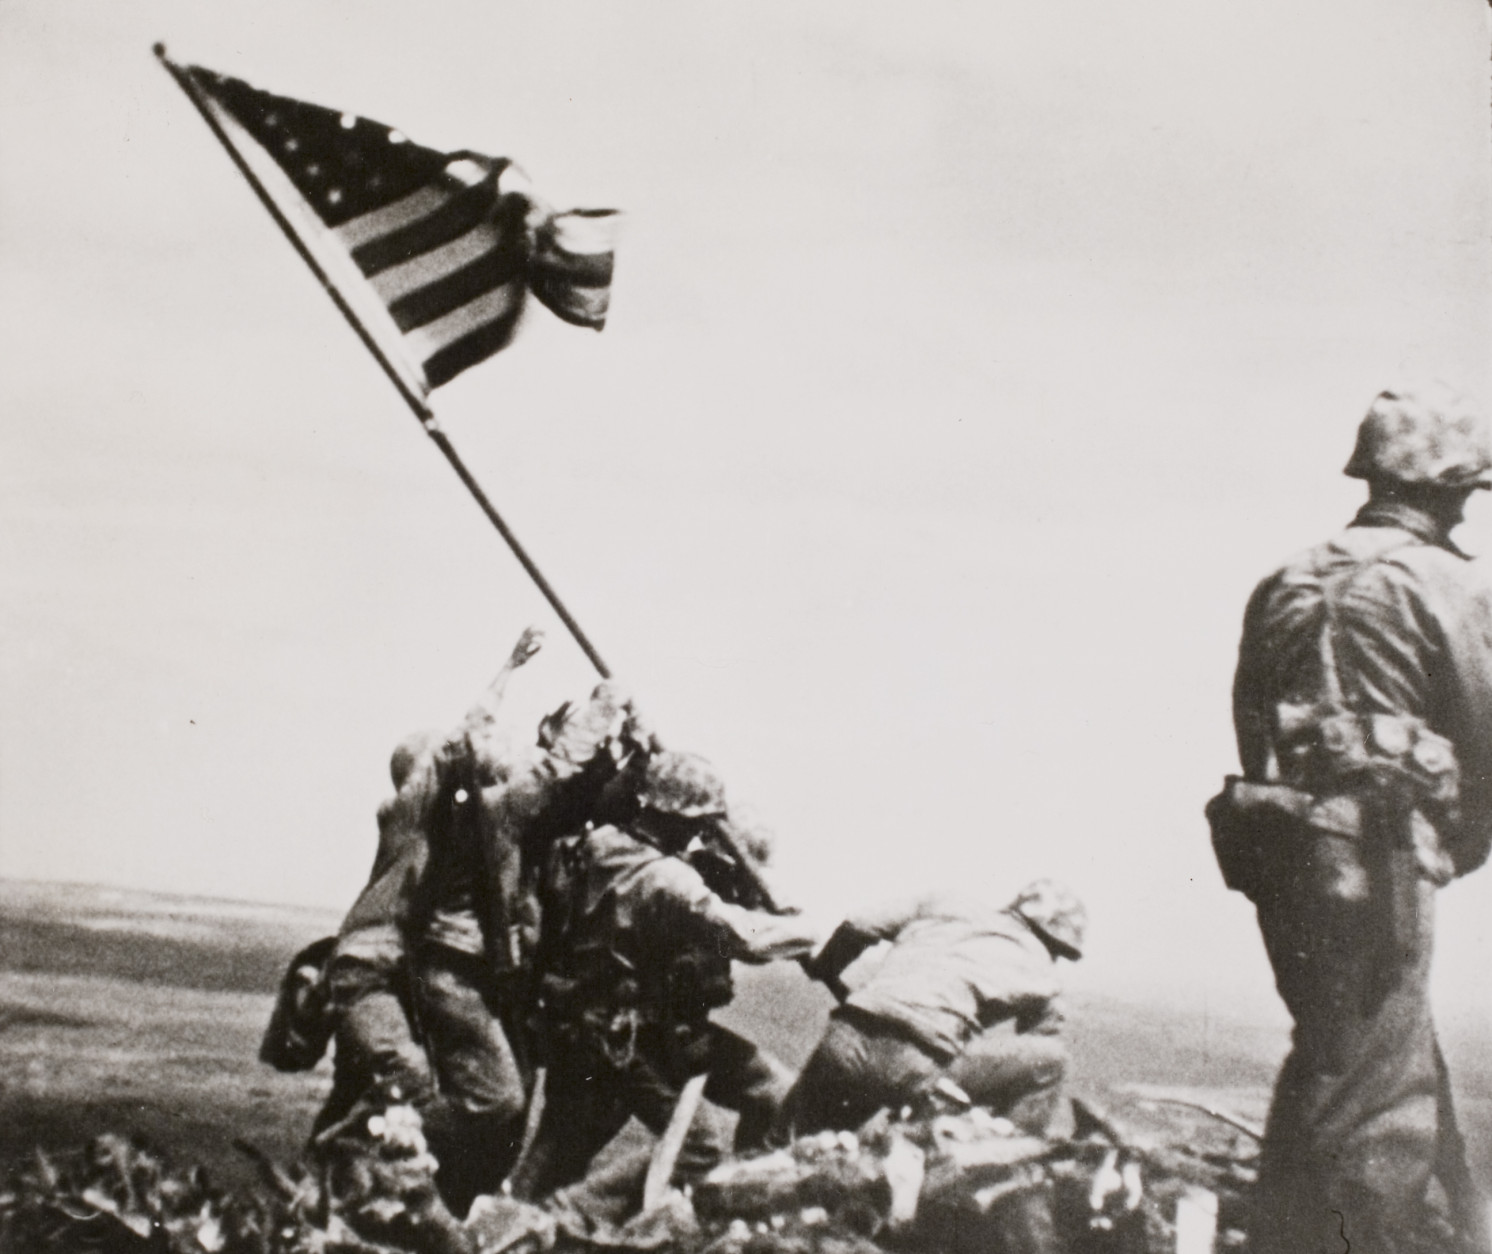 This black-and-white image provided by the National Archives shows a "still" taken from the 16 mm movie series of Marines raising the American flag on the summit of Mount Suribachi, on Iwo Jima. (AP Photo/Files/William H. Genaust)